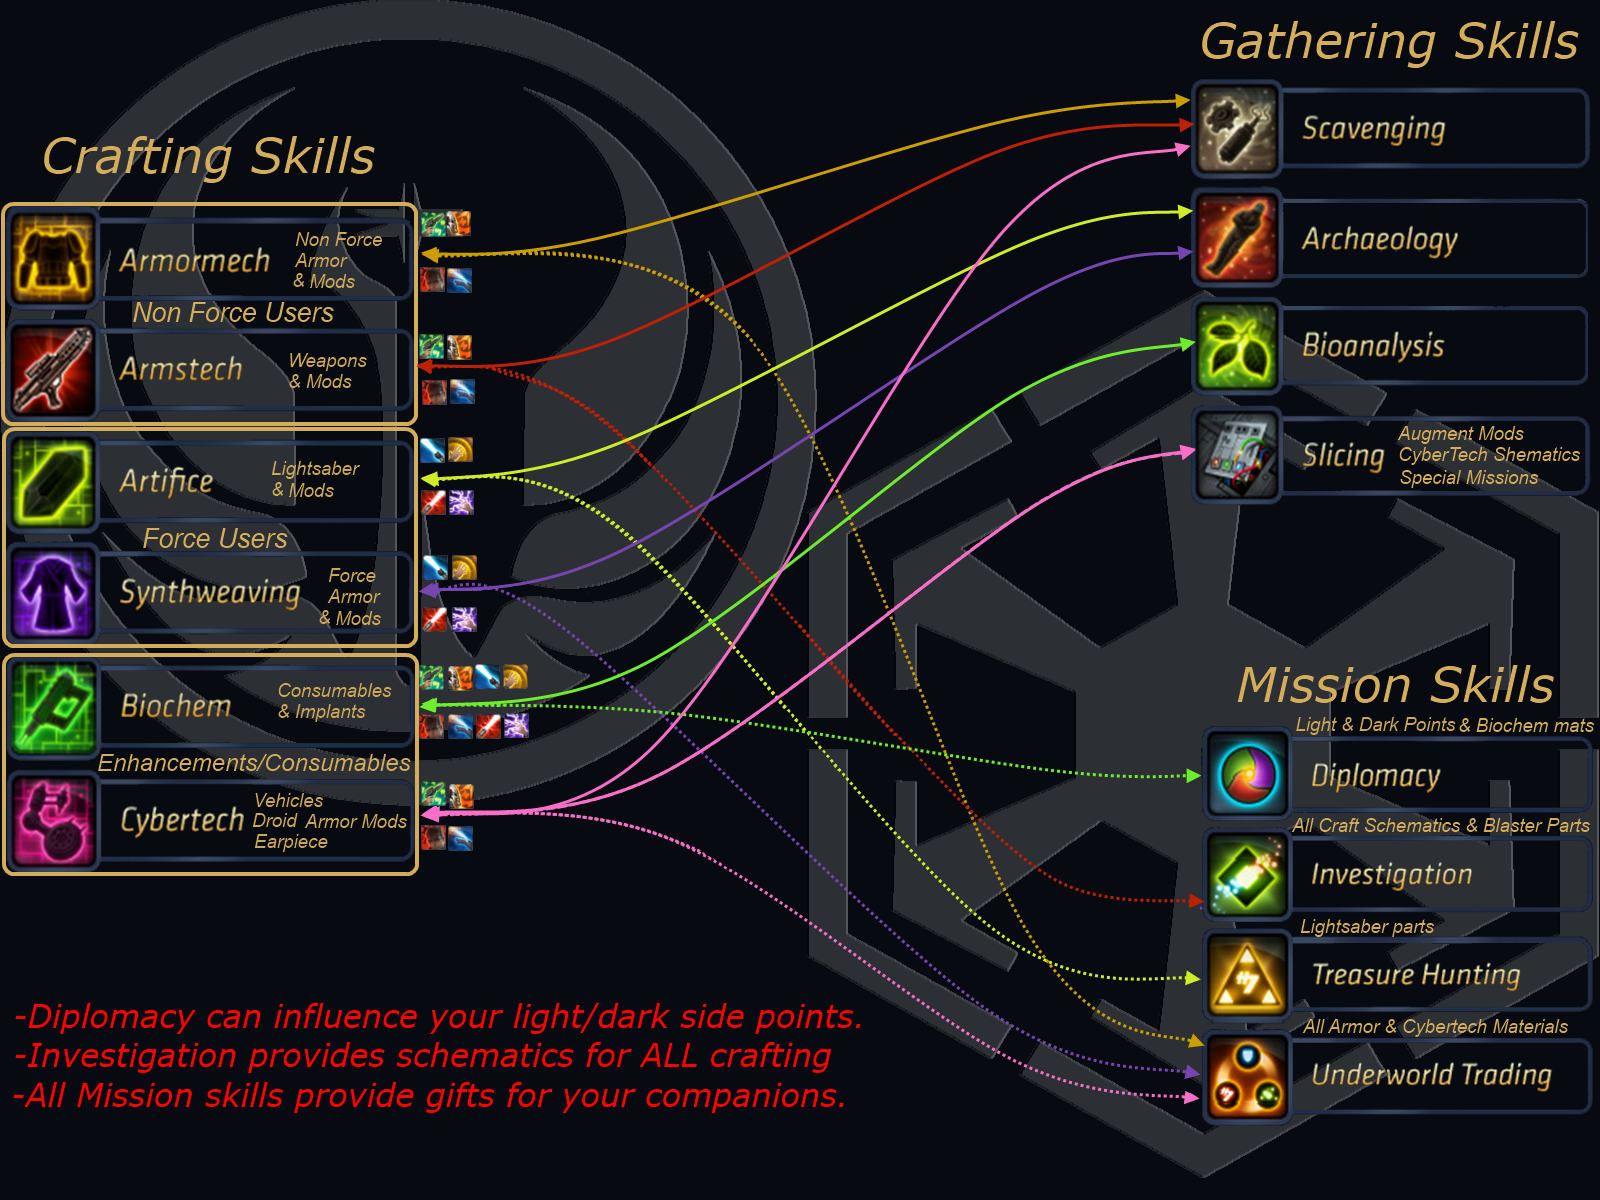 SWTOR professions visual guide. 